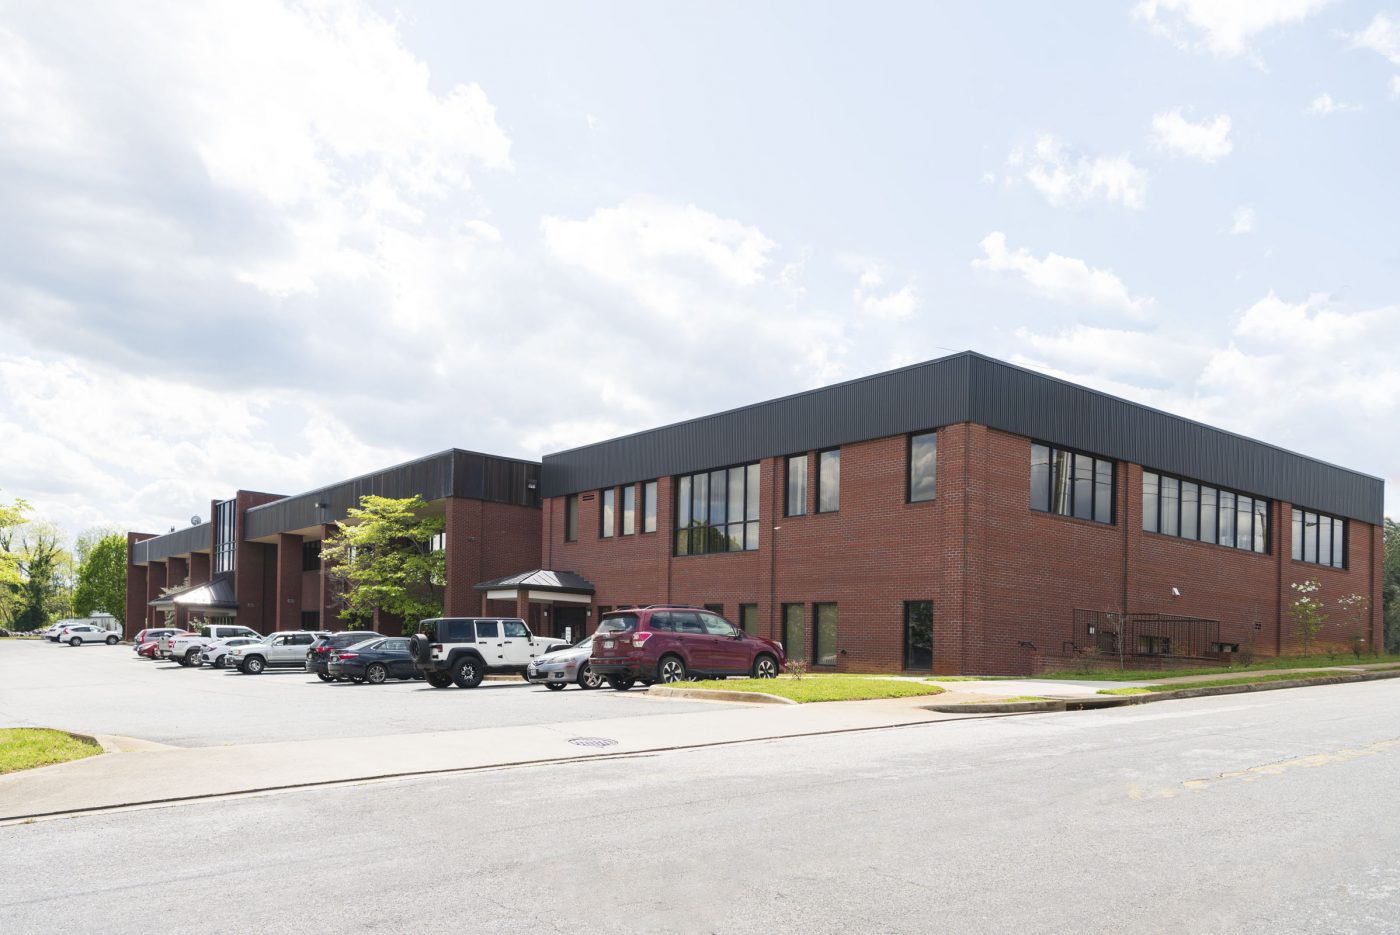 Amherst County Administration Building Architectural Partners